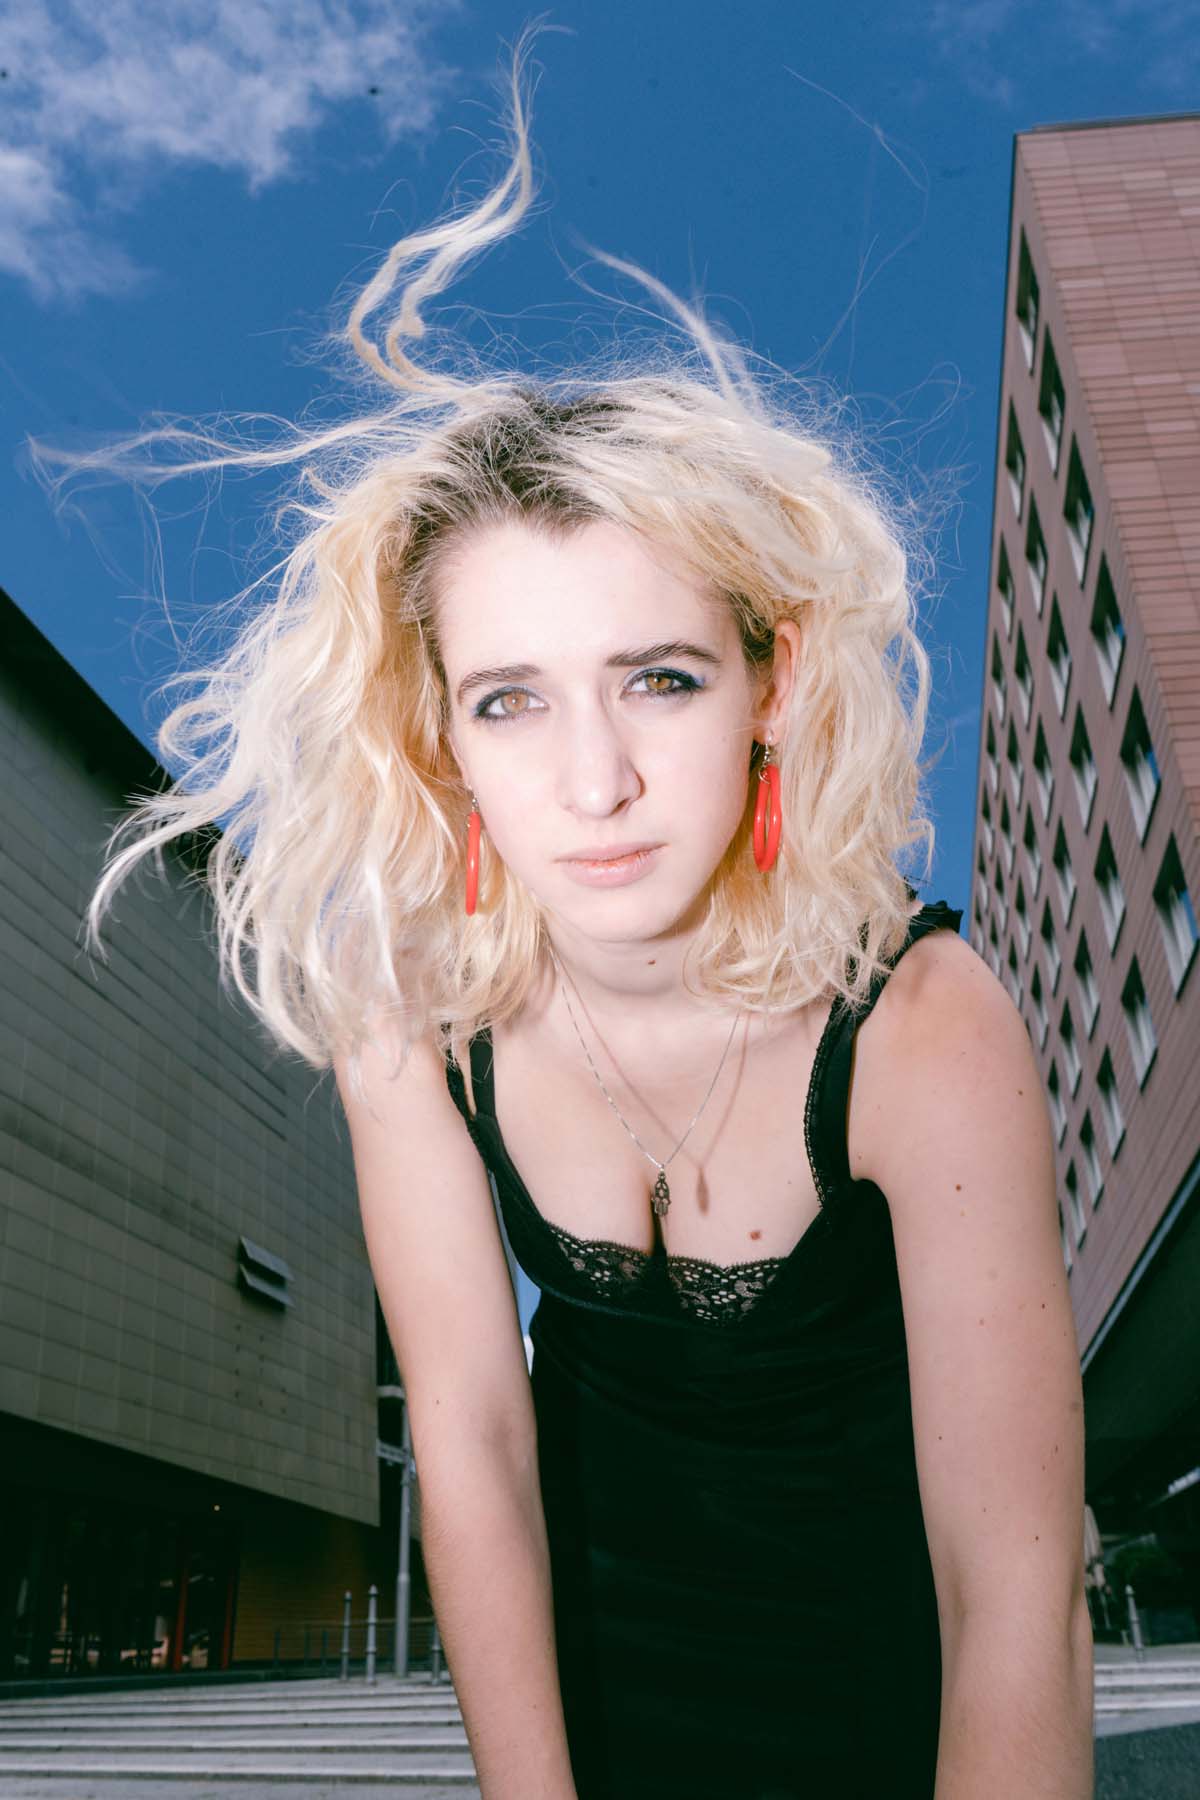 White woman with blonde hair leans forward with a serious expression. Fee Aviv has blonde hair that is blown by the wind. She is wearing a black spaghetti strap dress and orange-coloured hoop earrings. Behind her is a city backdrop with multi-storey buildings and a blue sky.